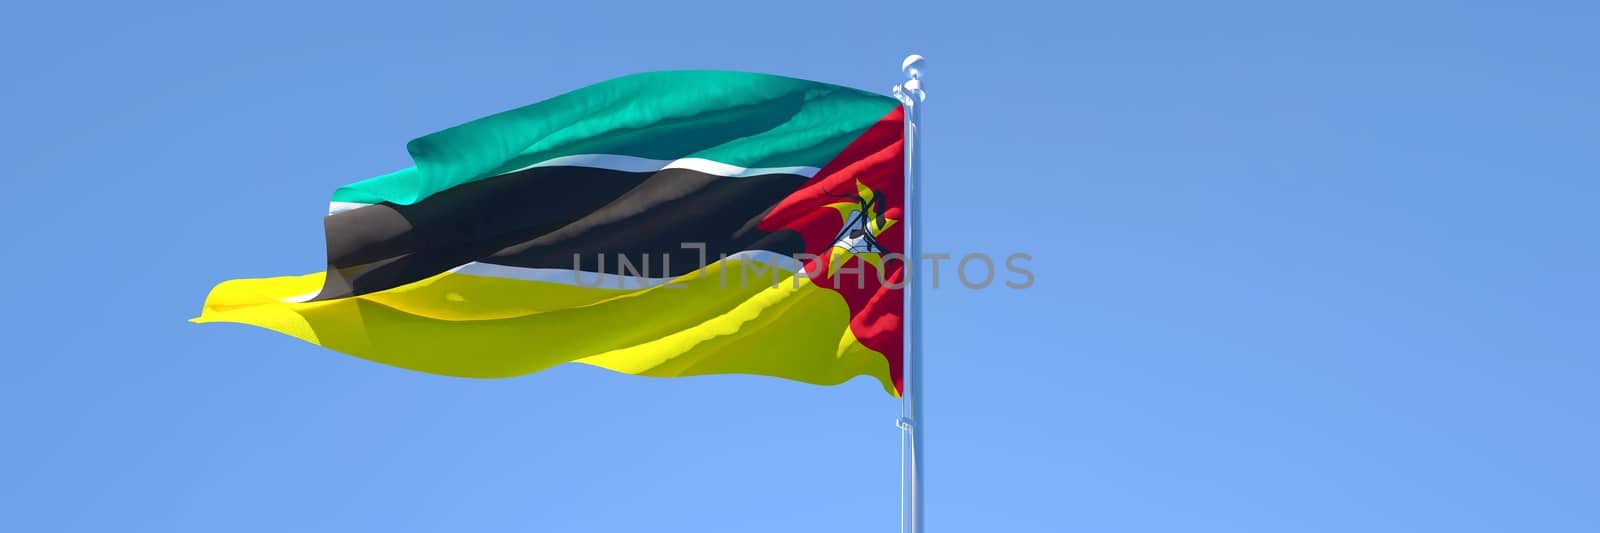 3D rendering of the national flag of Mozambique waving in the wind against a blue sky